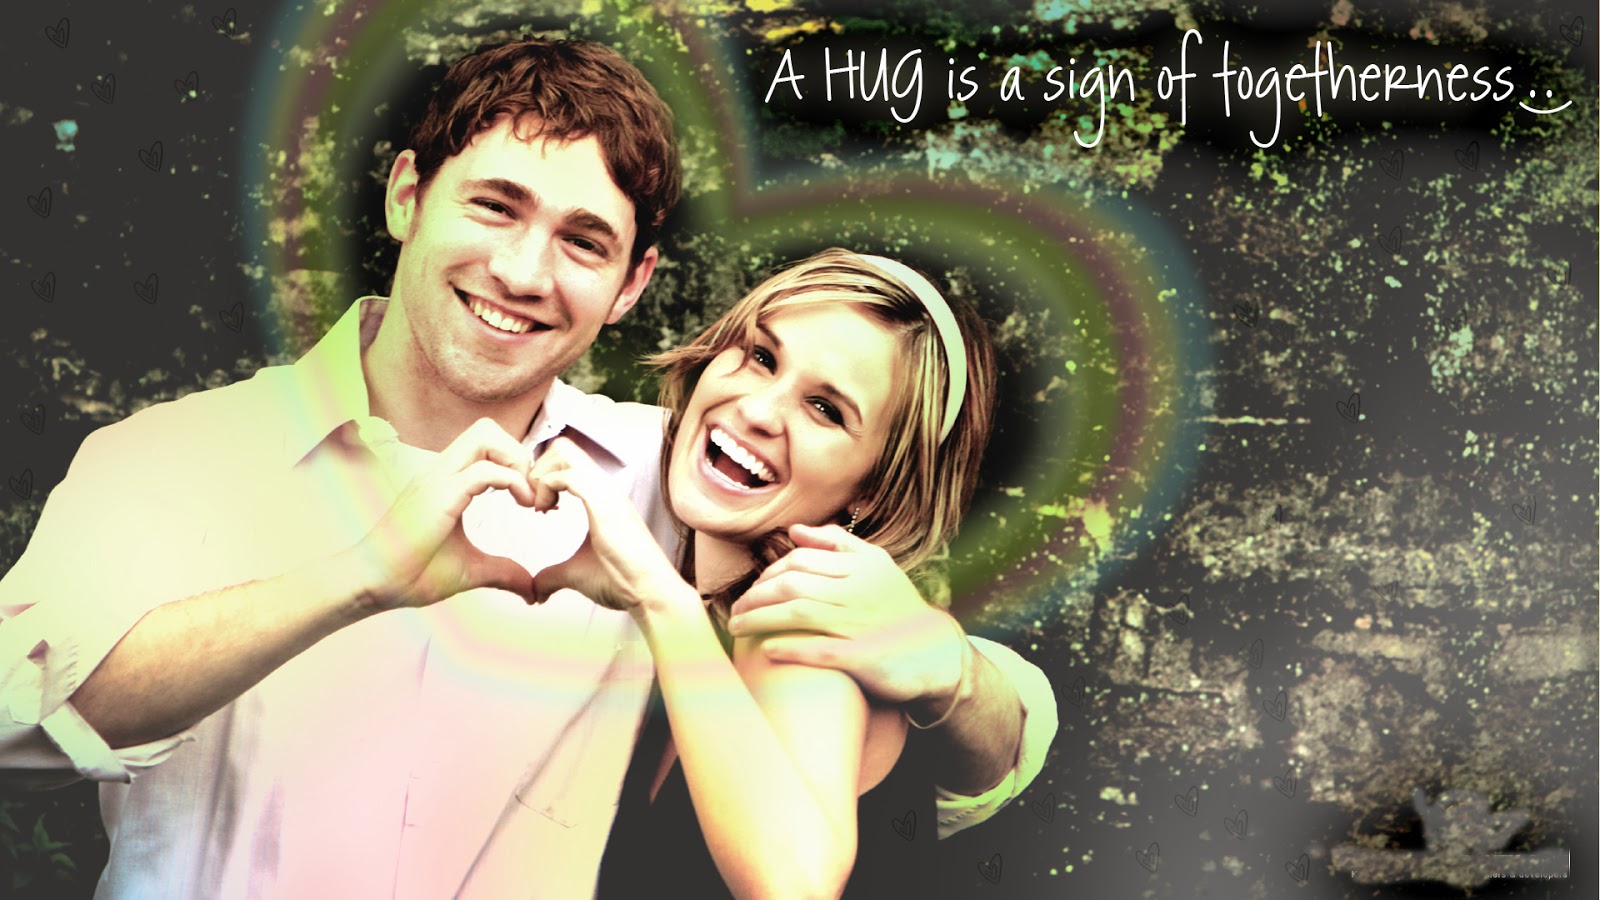 Happy Hug Day 12th February HD Wallpaper And